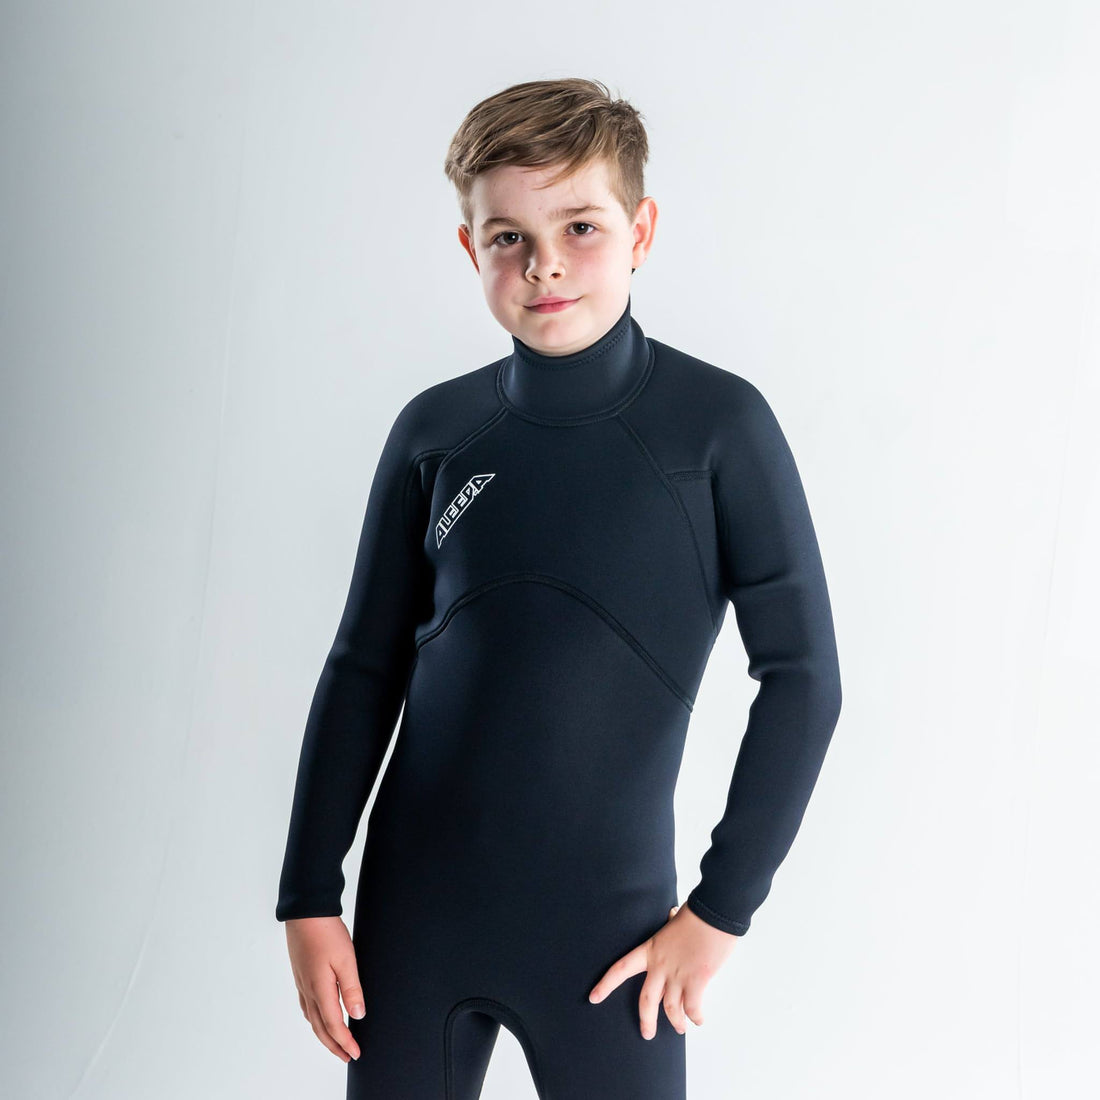 Wetsuit, Steamer, Long Sleeve, Australian made, Boys, Youth - front angle